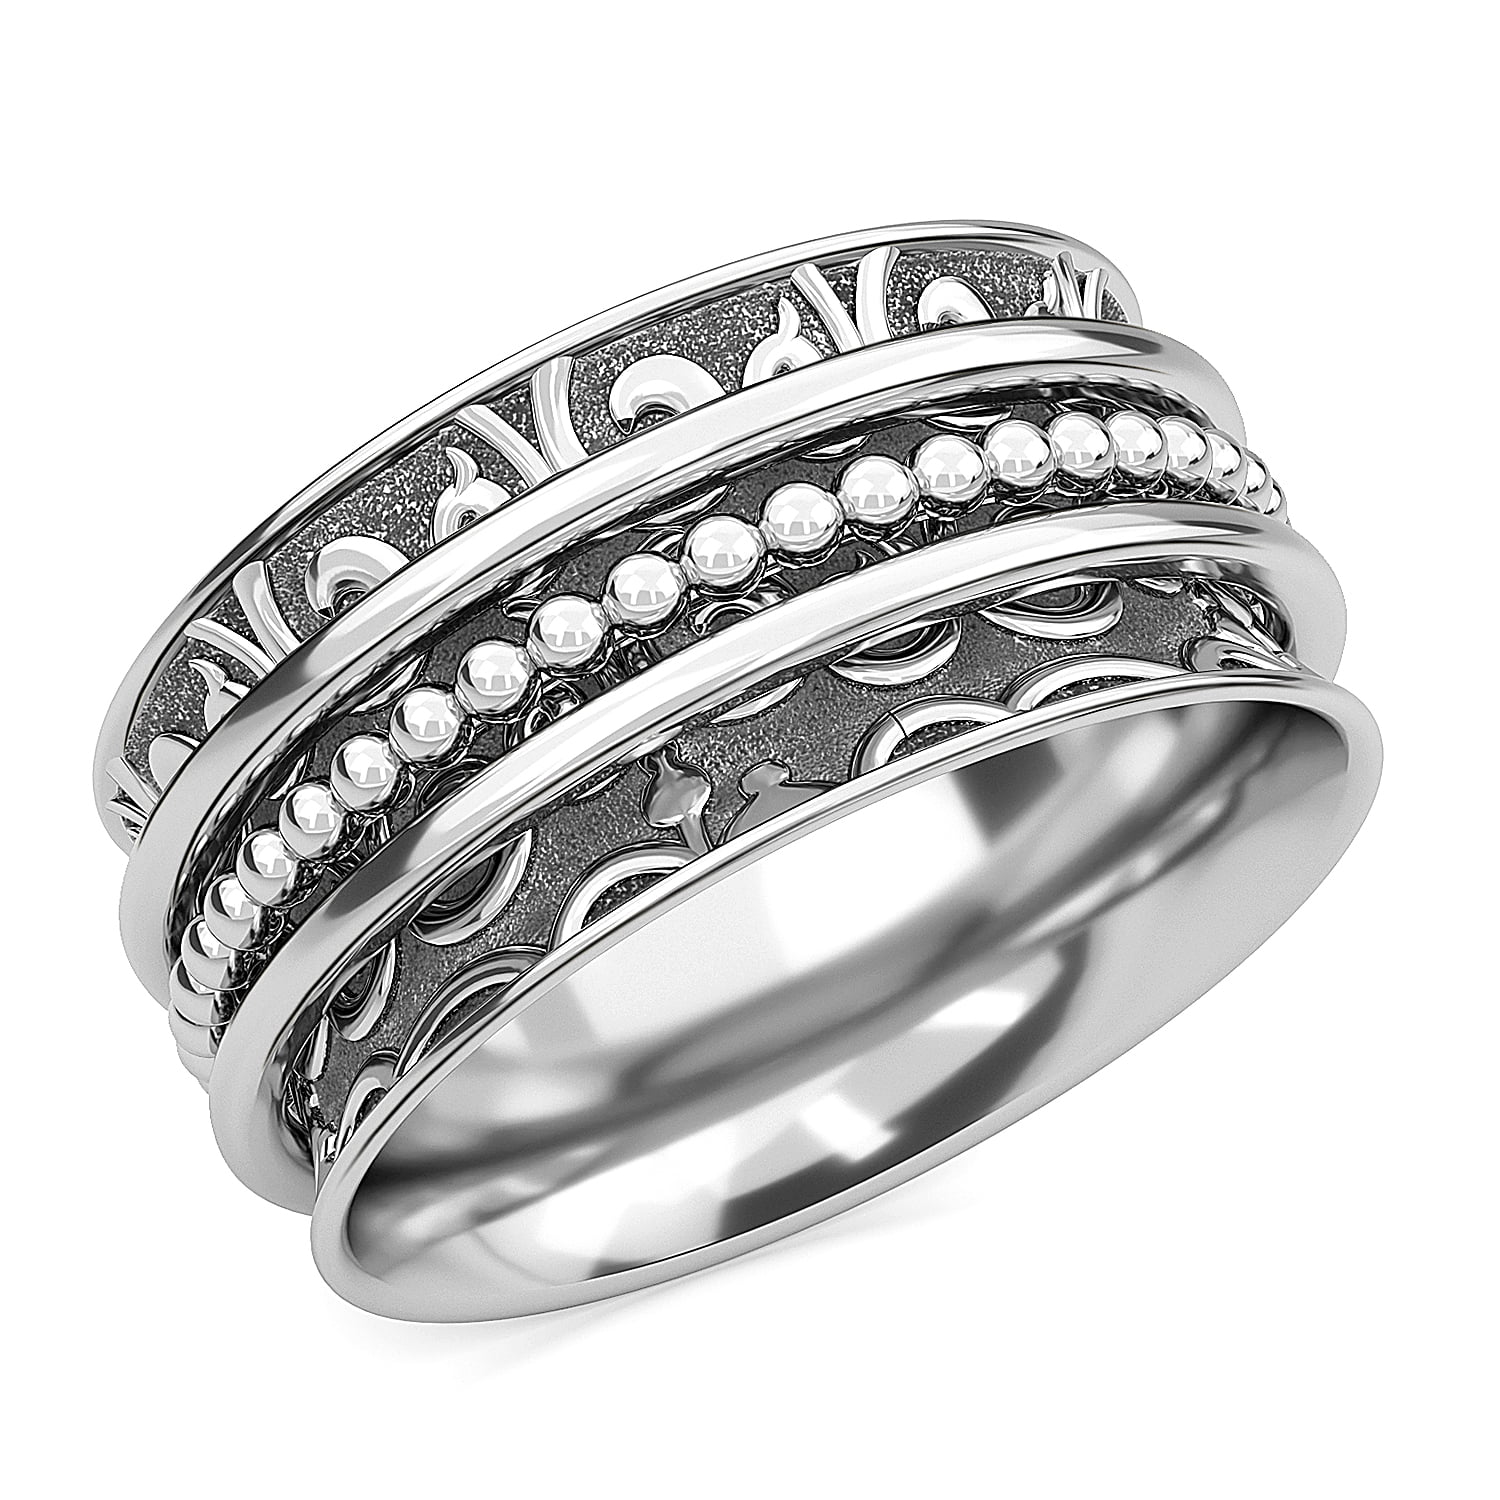 Spinner Ring For Women 925 Silver Ring Fidget Ring Perfect Gift For Her Spinning Ring Anxiety Ring Worry Ring Boho Ring Spinner Ring